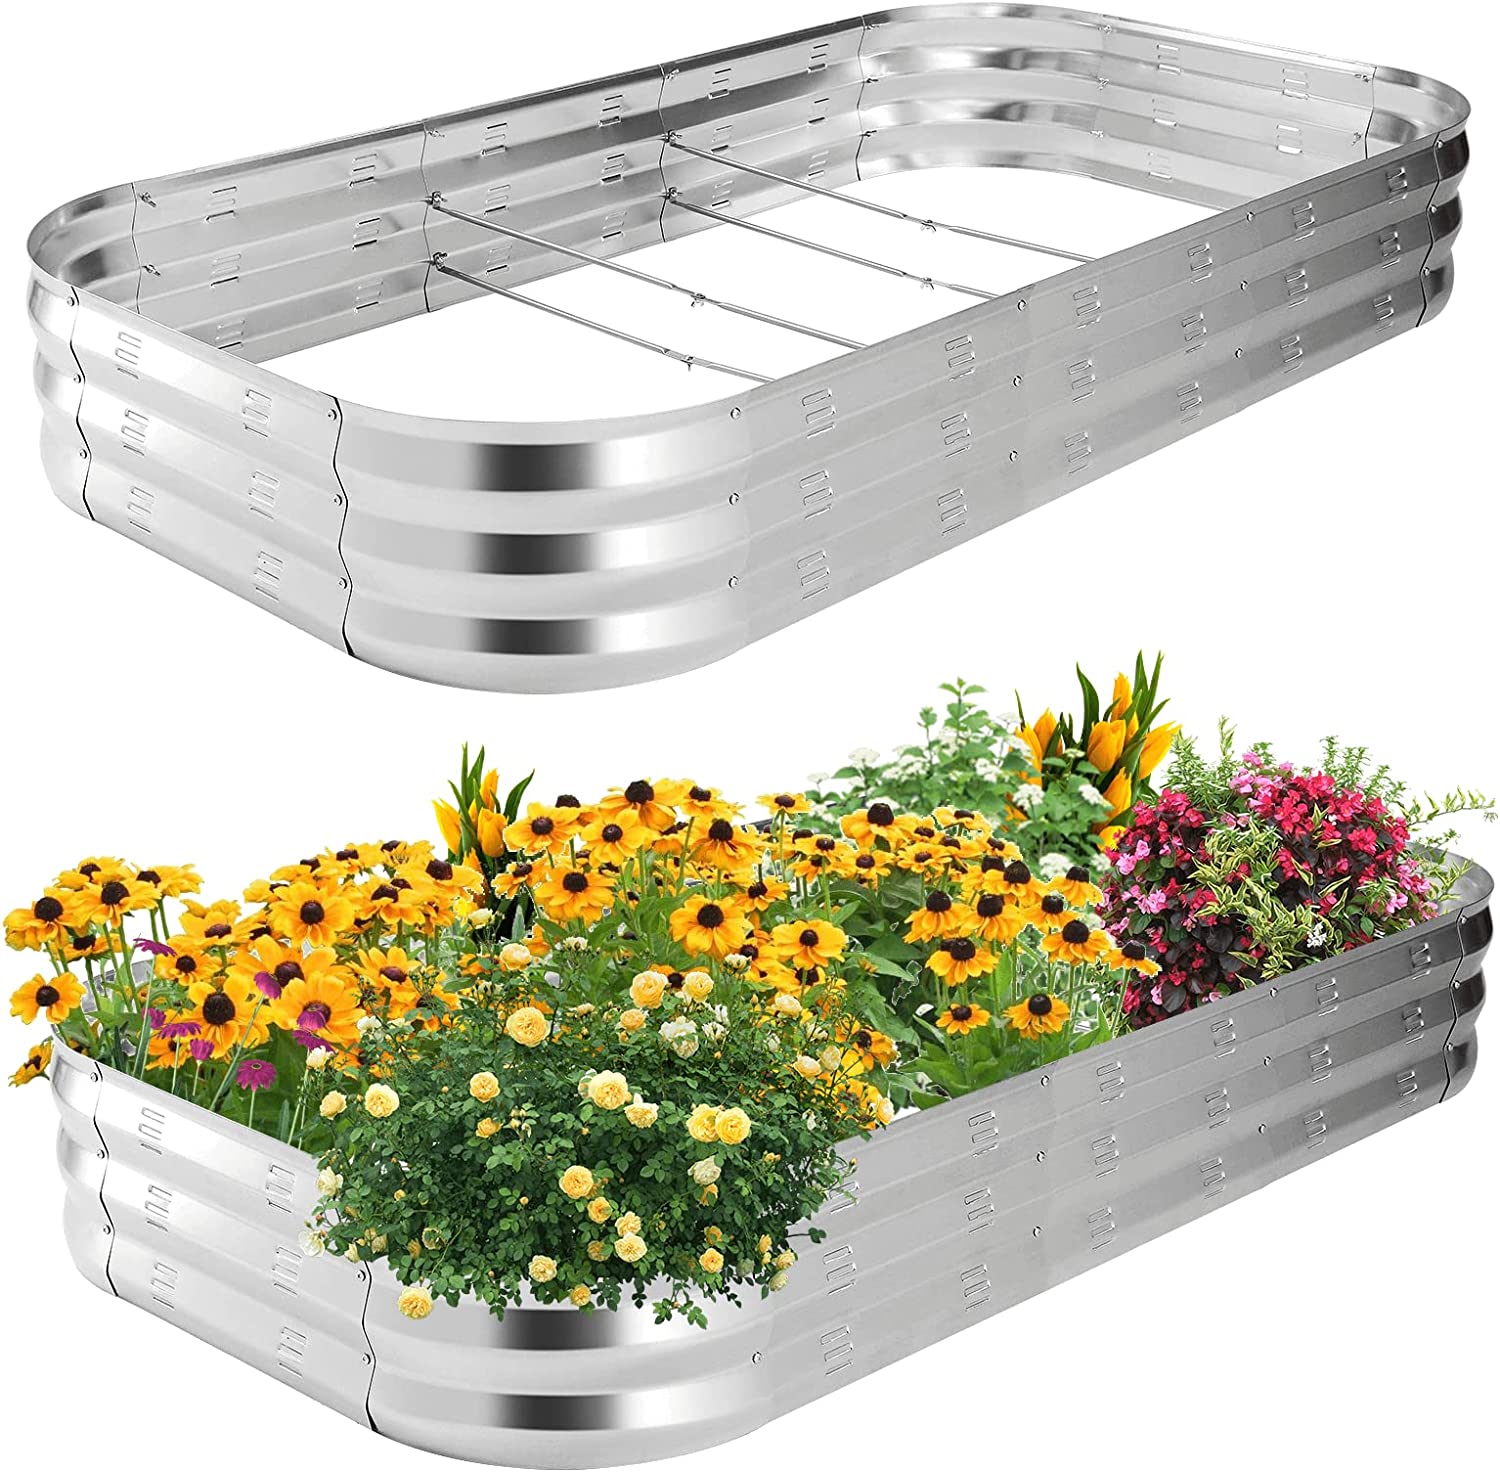 POTEY Raised Garden Bed 2Pcs, Galvanized Garden Boxes Outdoor Raised for Vegetables Flowers Herb, Rectangular Planter Raised Beds Kit with Weed Barrier Fabric and Soil Ventilation Holes